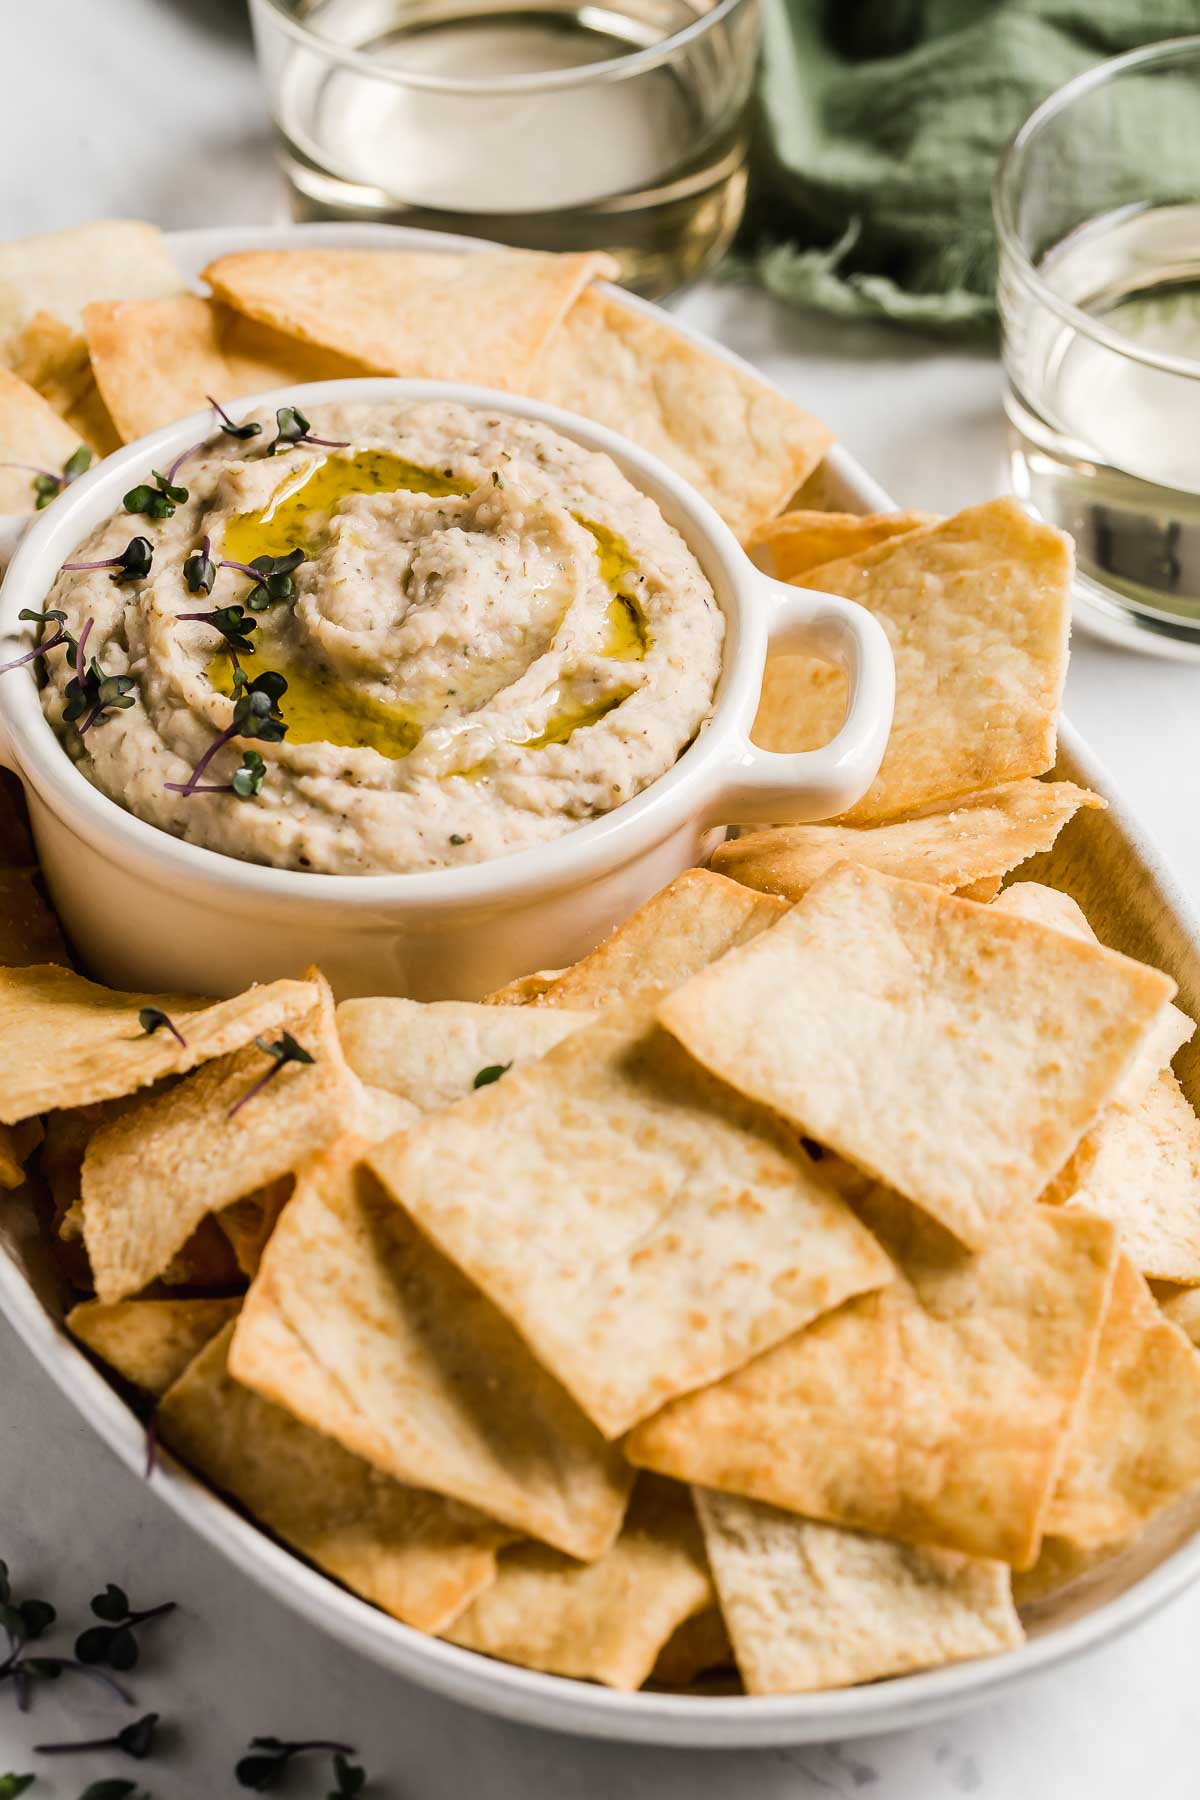 White bean dip in small cup with pita chips around it.